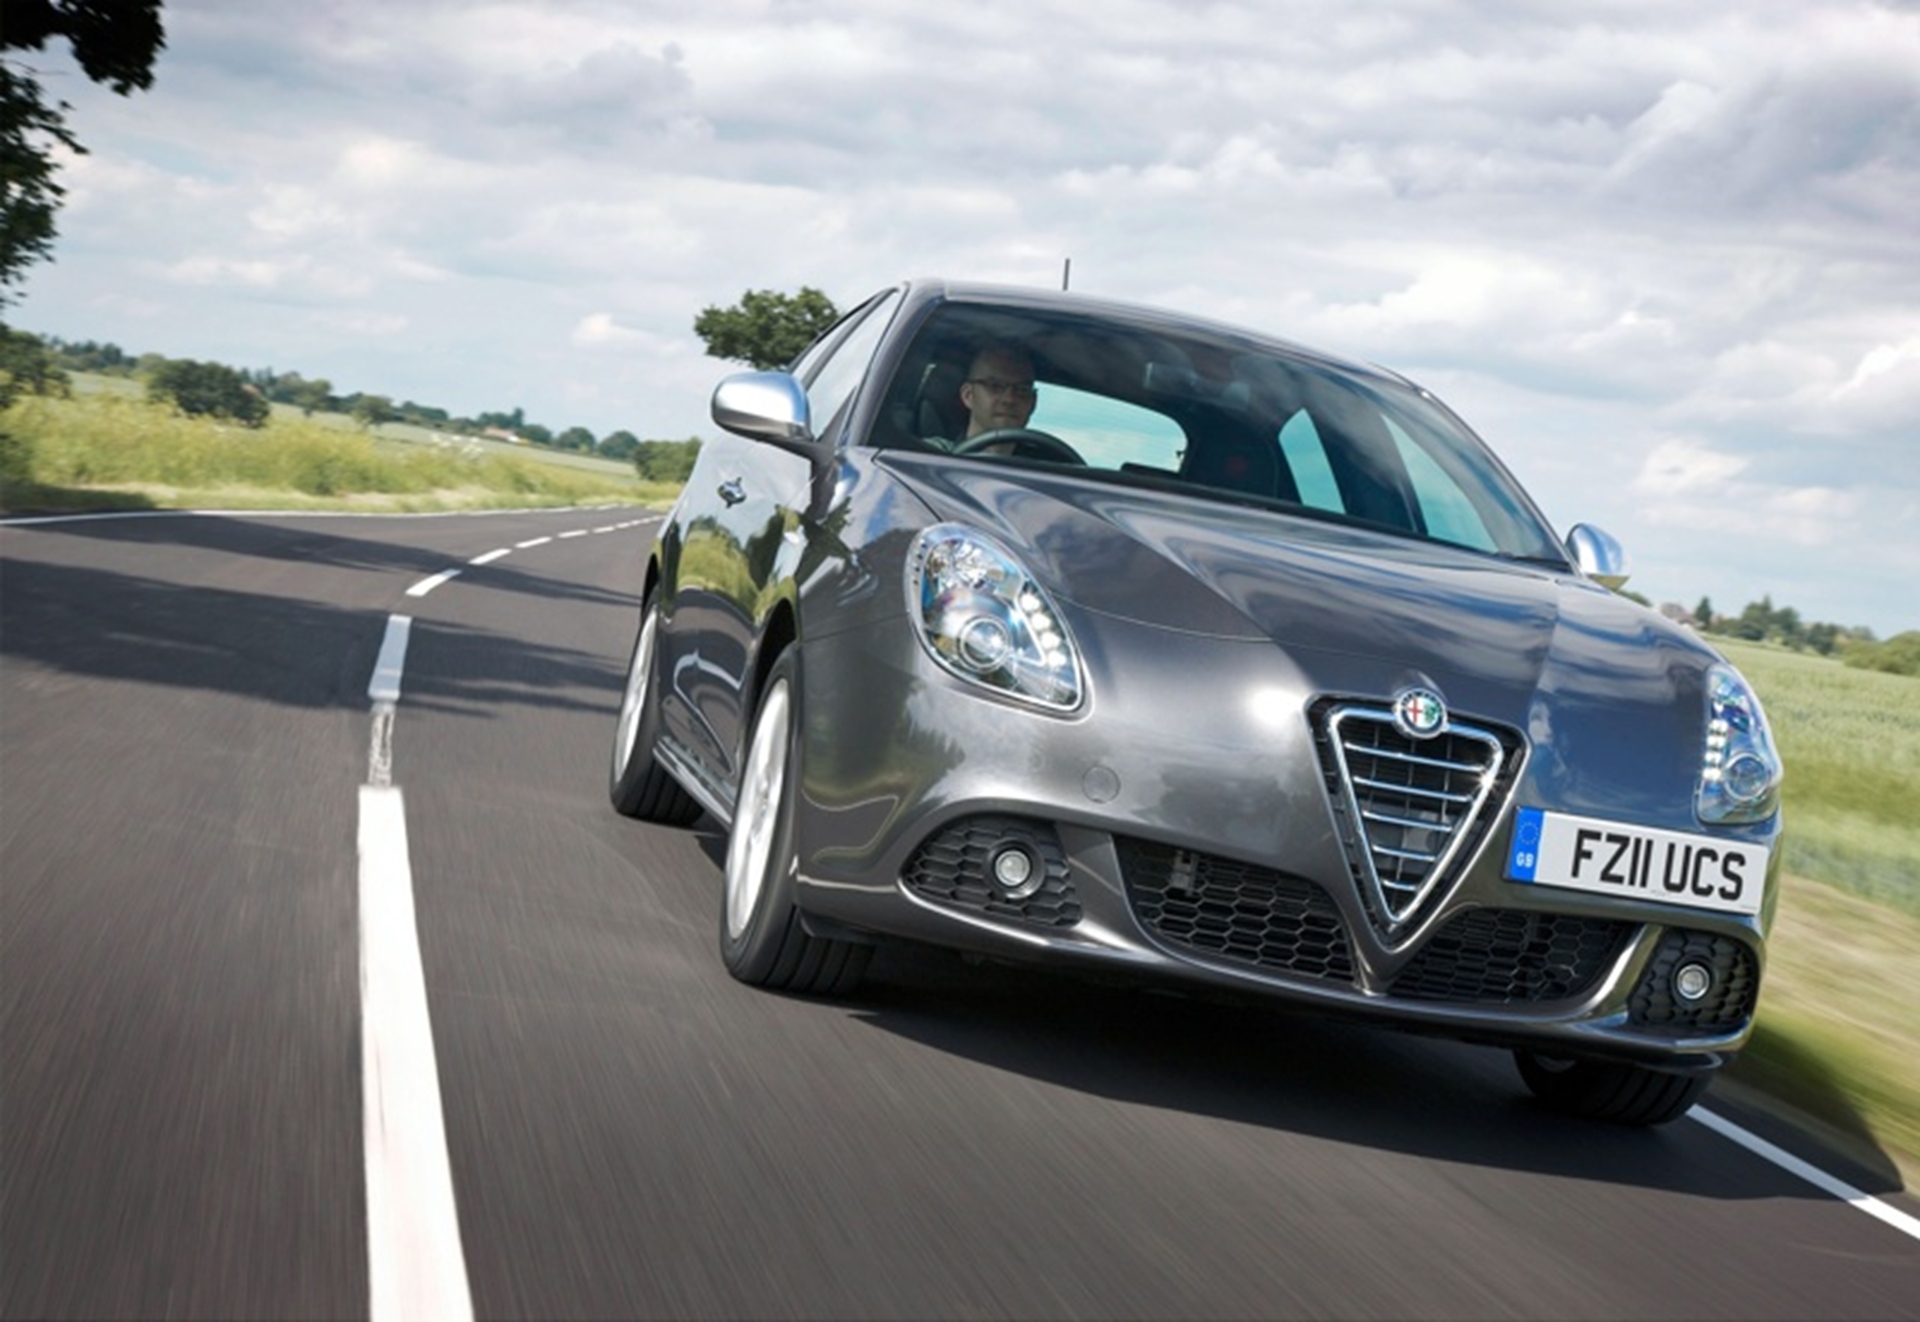 Alfa Romeo TCT system now available in Giulietta and MiTo models